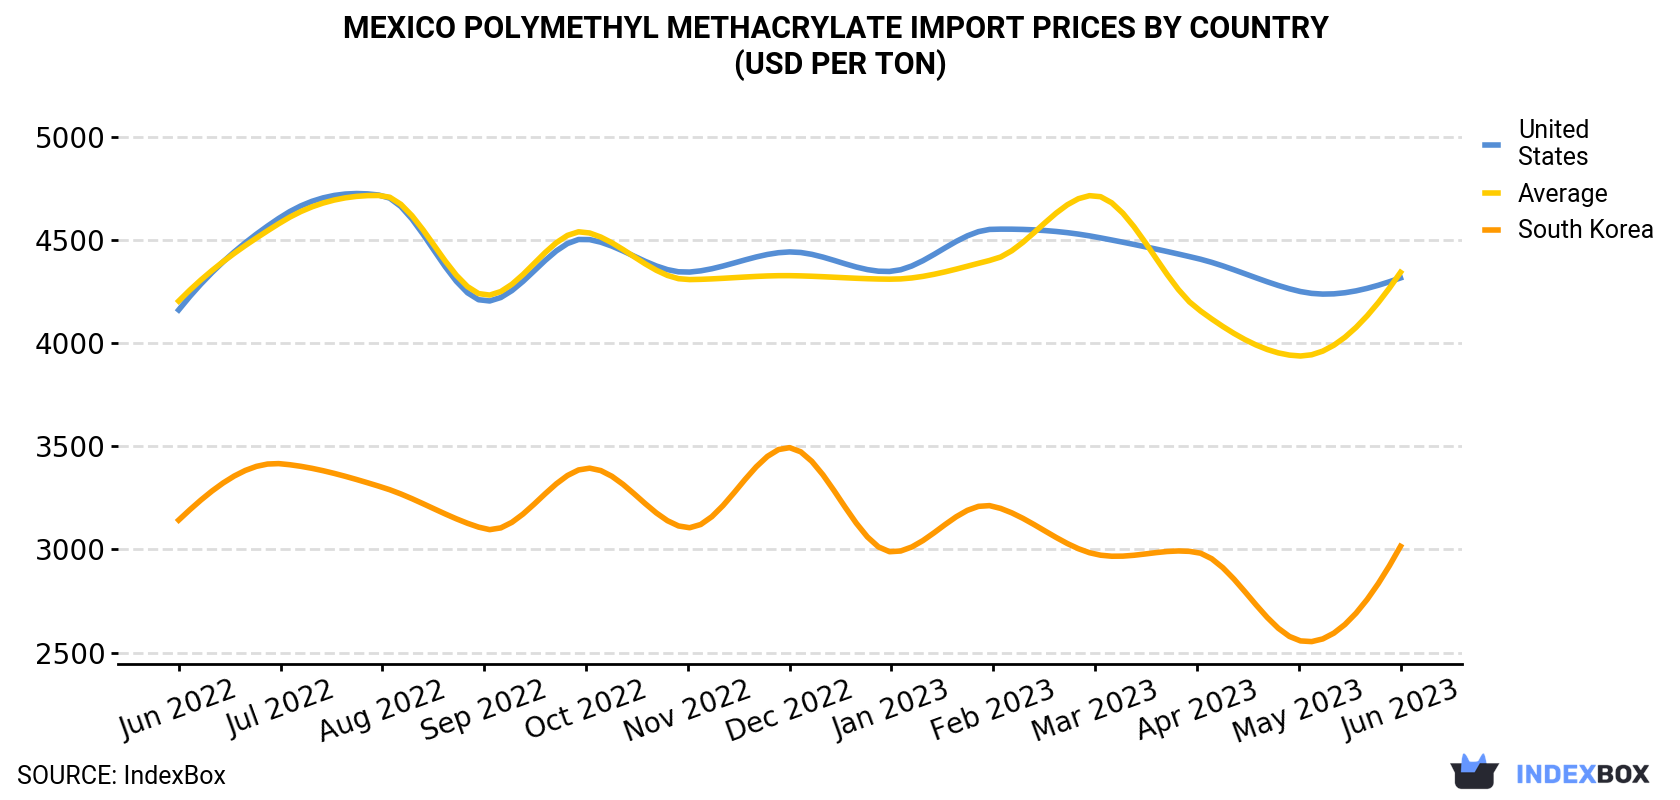 Mexico Polymethyl Methacrylate Import Prices By Country (USD Per Ton)